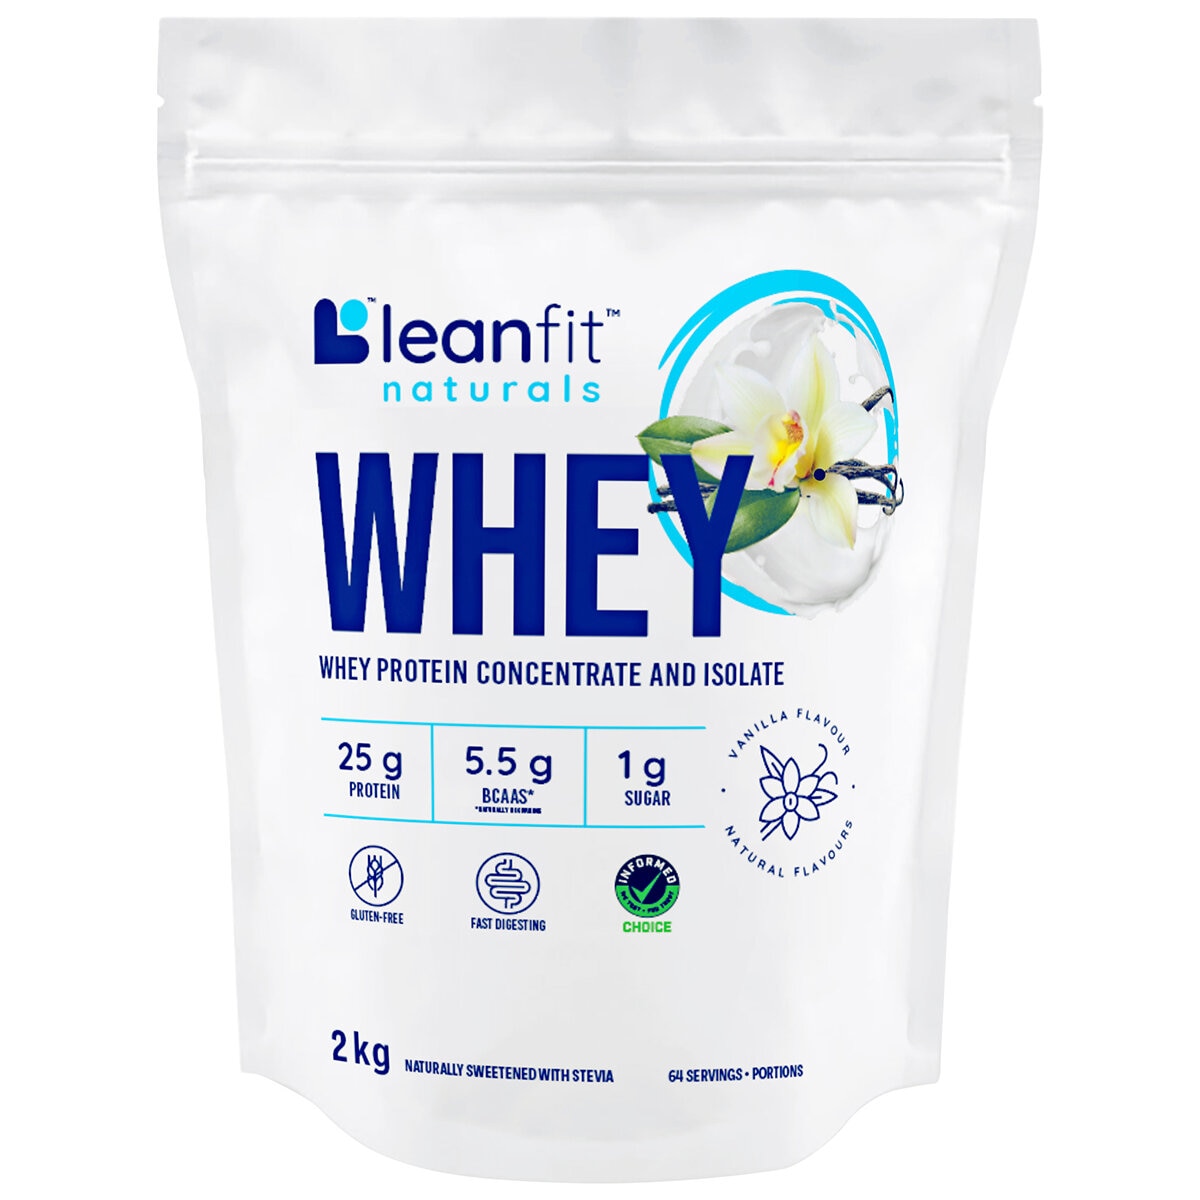 Leanfit Naturals Whey Protein Concentrate and Isolate Vanilla 2kg